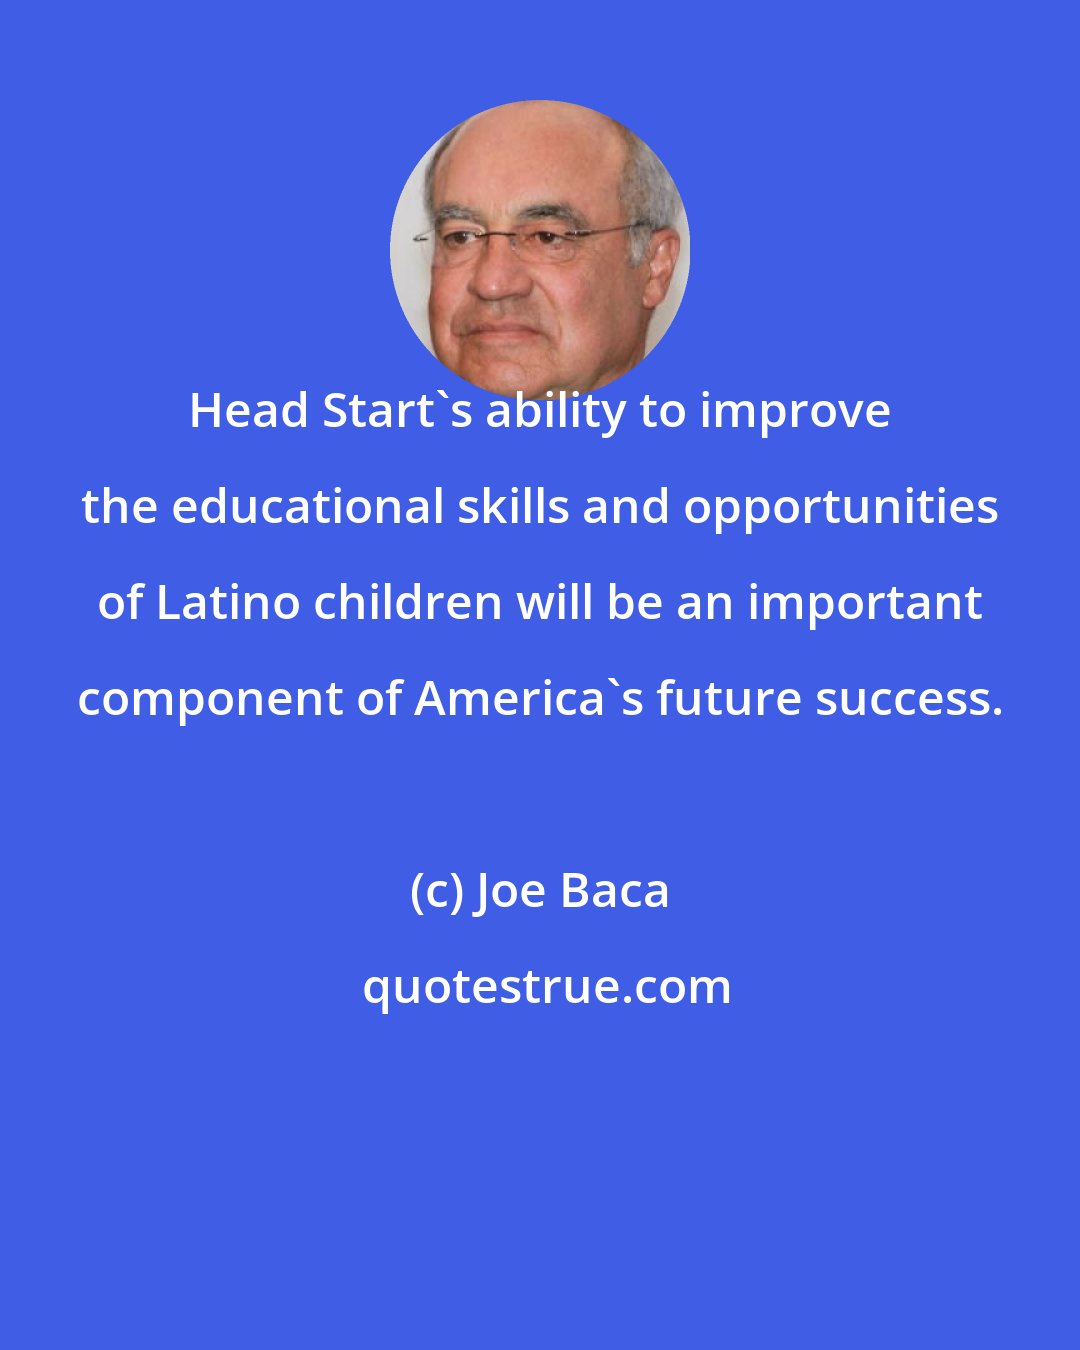 Joe Baca: Head Start's ability to improve the educational skills and opportunities of Latino children will be an important component of America's future success.